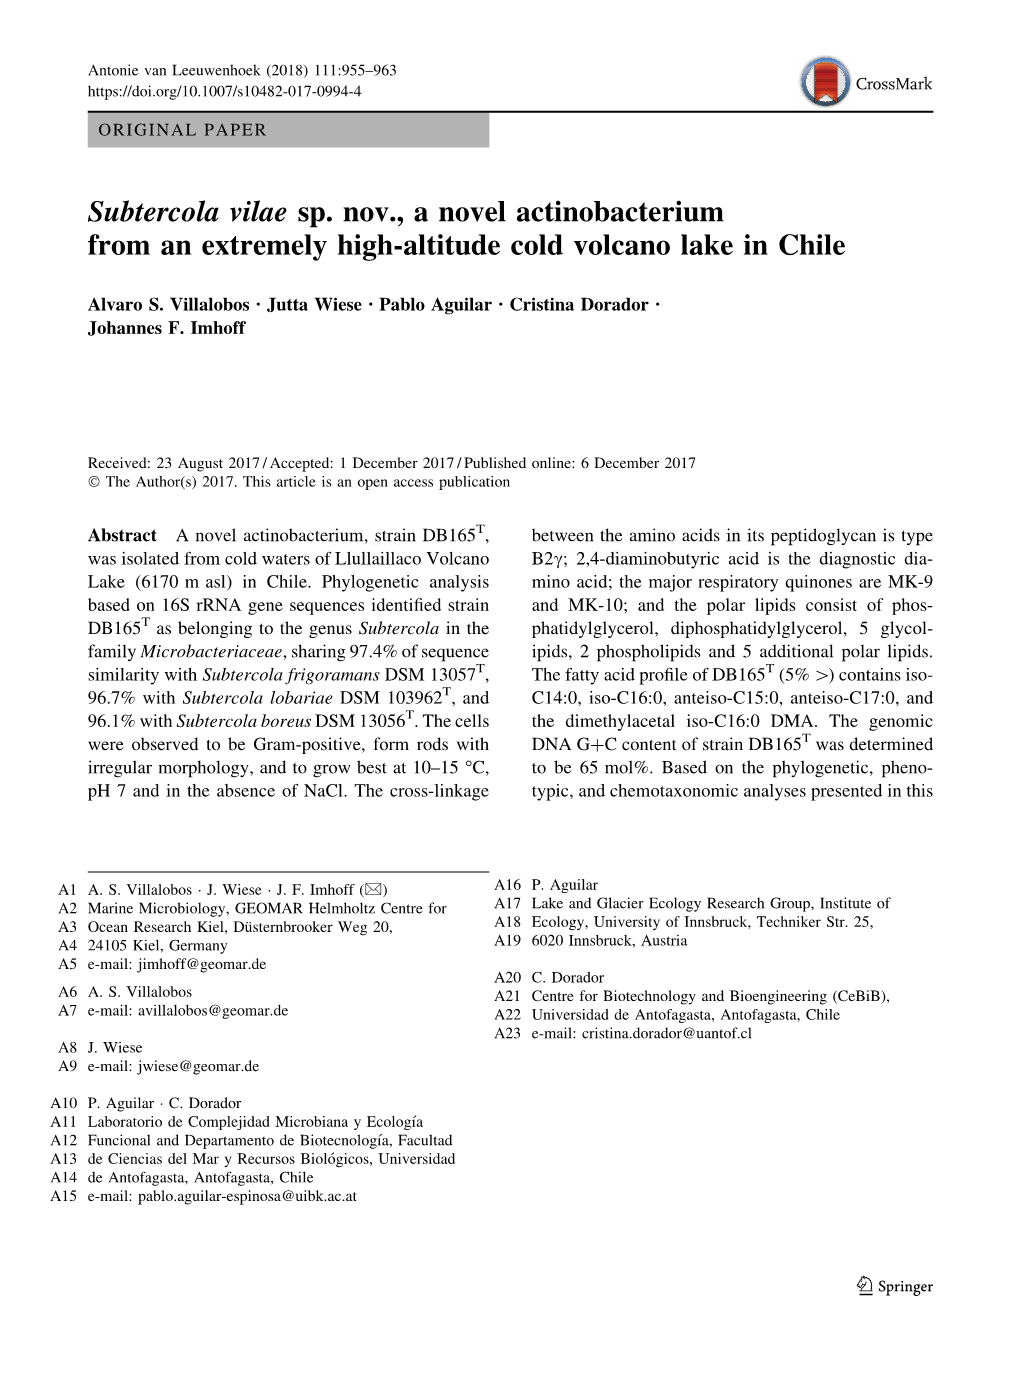 Subtercola Vilae Sp. Nov., a Novel Actinobacterium from an Extremely High-Altitude Cold Volcano Lake in Chile